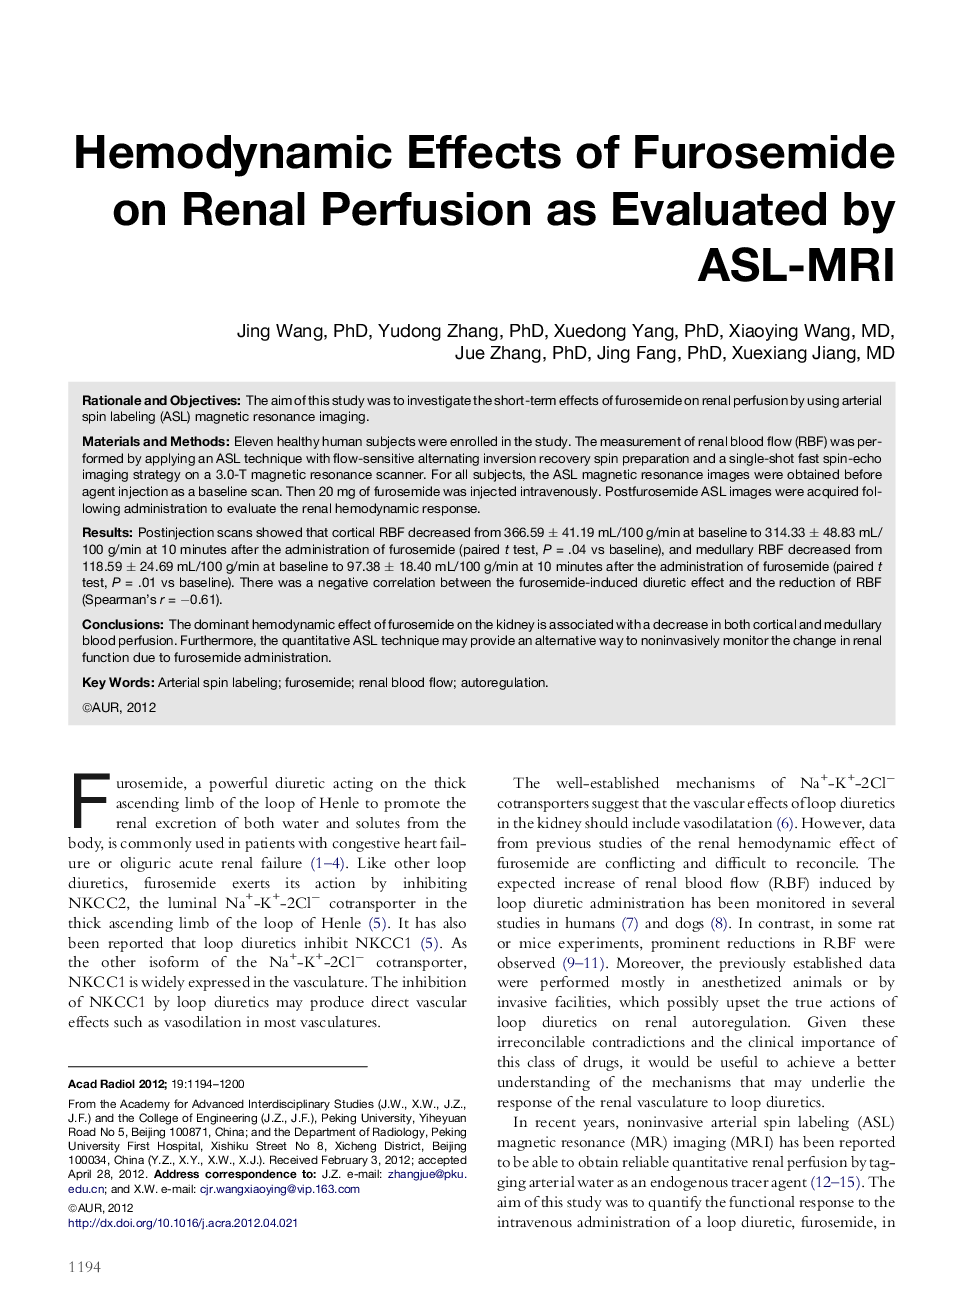 Hemodynamic Effects of Furosemide on Renal Perfusion as Evaluated by ASL-MRI